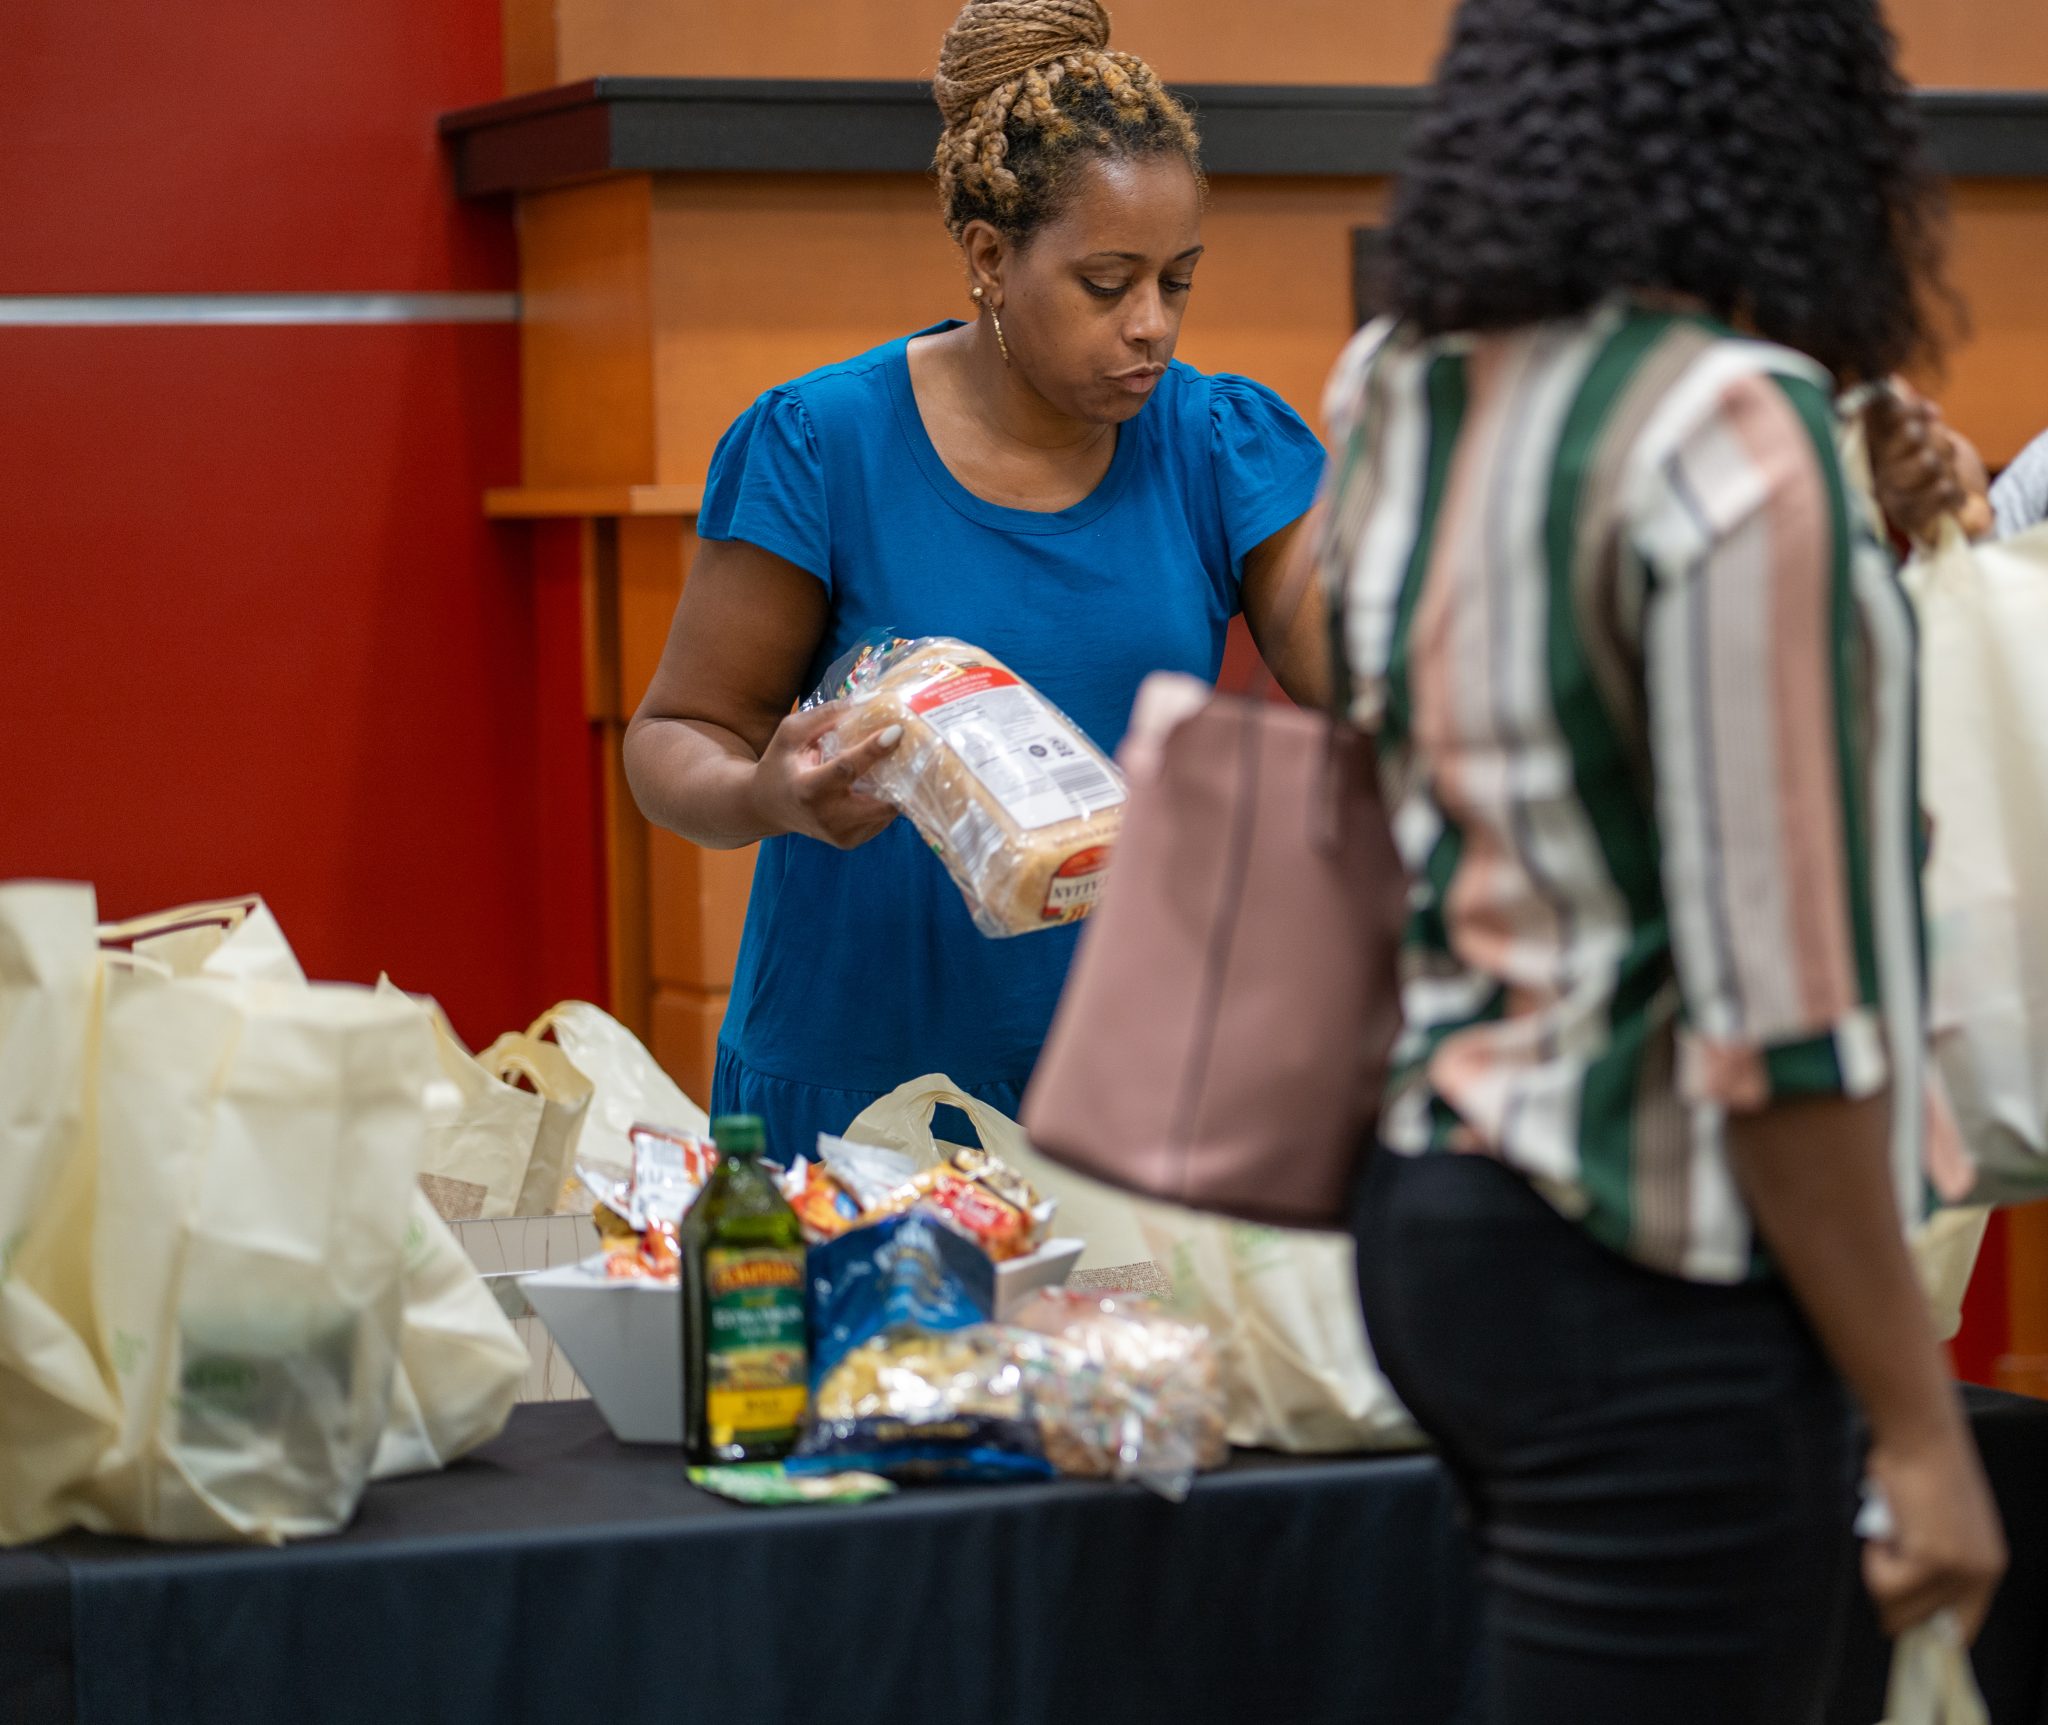 Jole’ Ruff, community program specialist, Division of Student Affairs, who manages the daily operations of the Student Pantry, hands out food and other products during a pop-up event this fall.